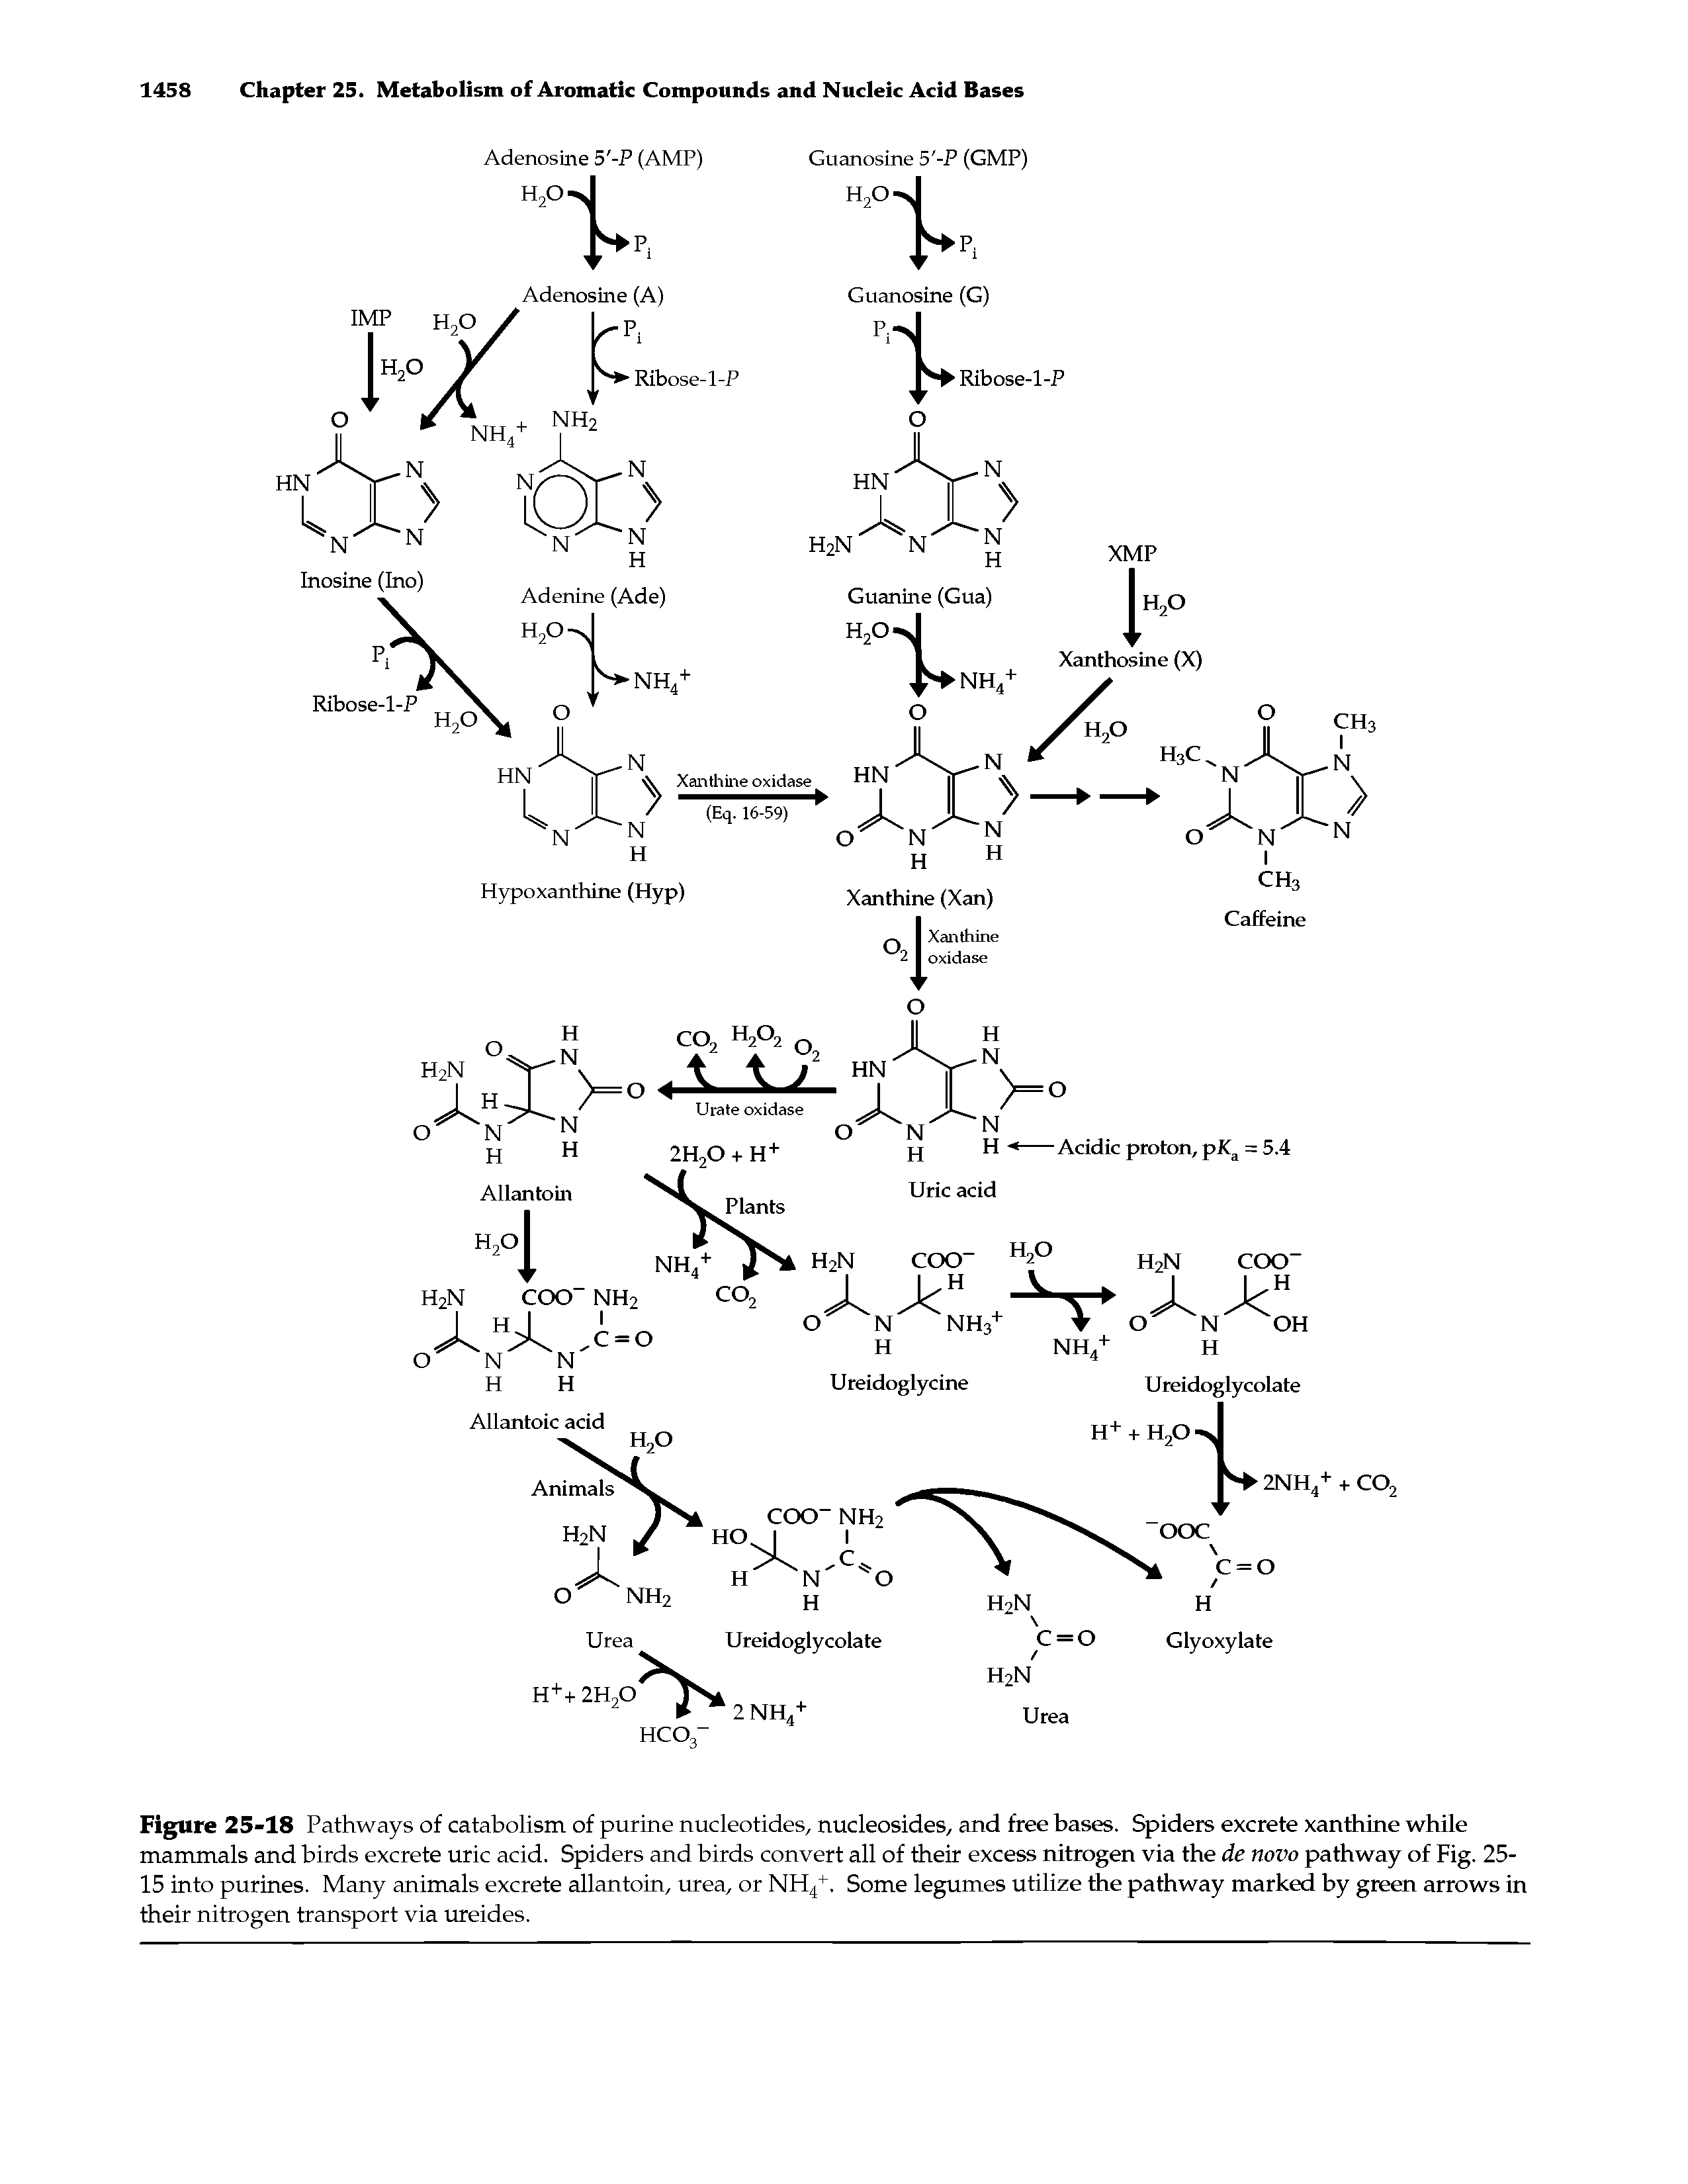 Figure 25-18 Pathways of catabolism of purine nucleotides, nucleosides, and free bases. Spiders excrete xanthine while mammals and birds excrete uric acid. Spiders and birds convert all of their excess nitrogen via the de novo pathway of Fig. 25-15 into purines. Many animals excrete allantoin, urea, or NH4+. Some legumes utilize the pathway marked by green arrows in their nitrogen transport via ureides.